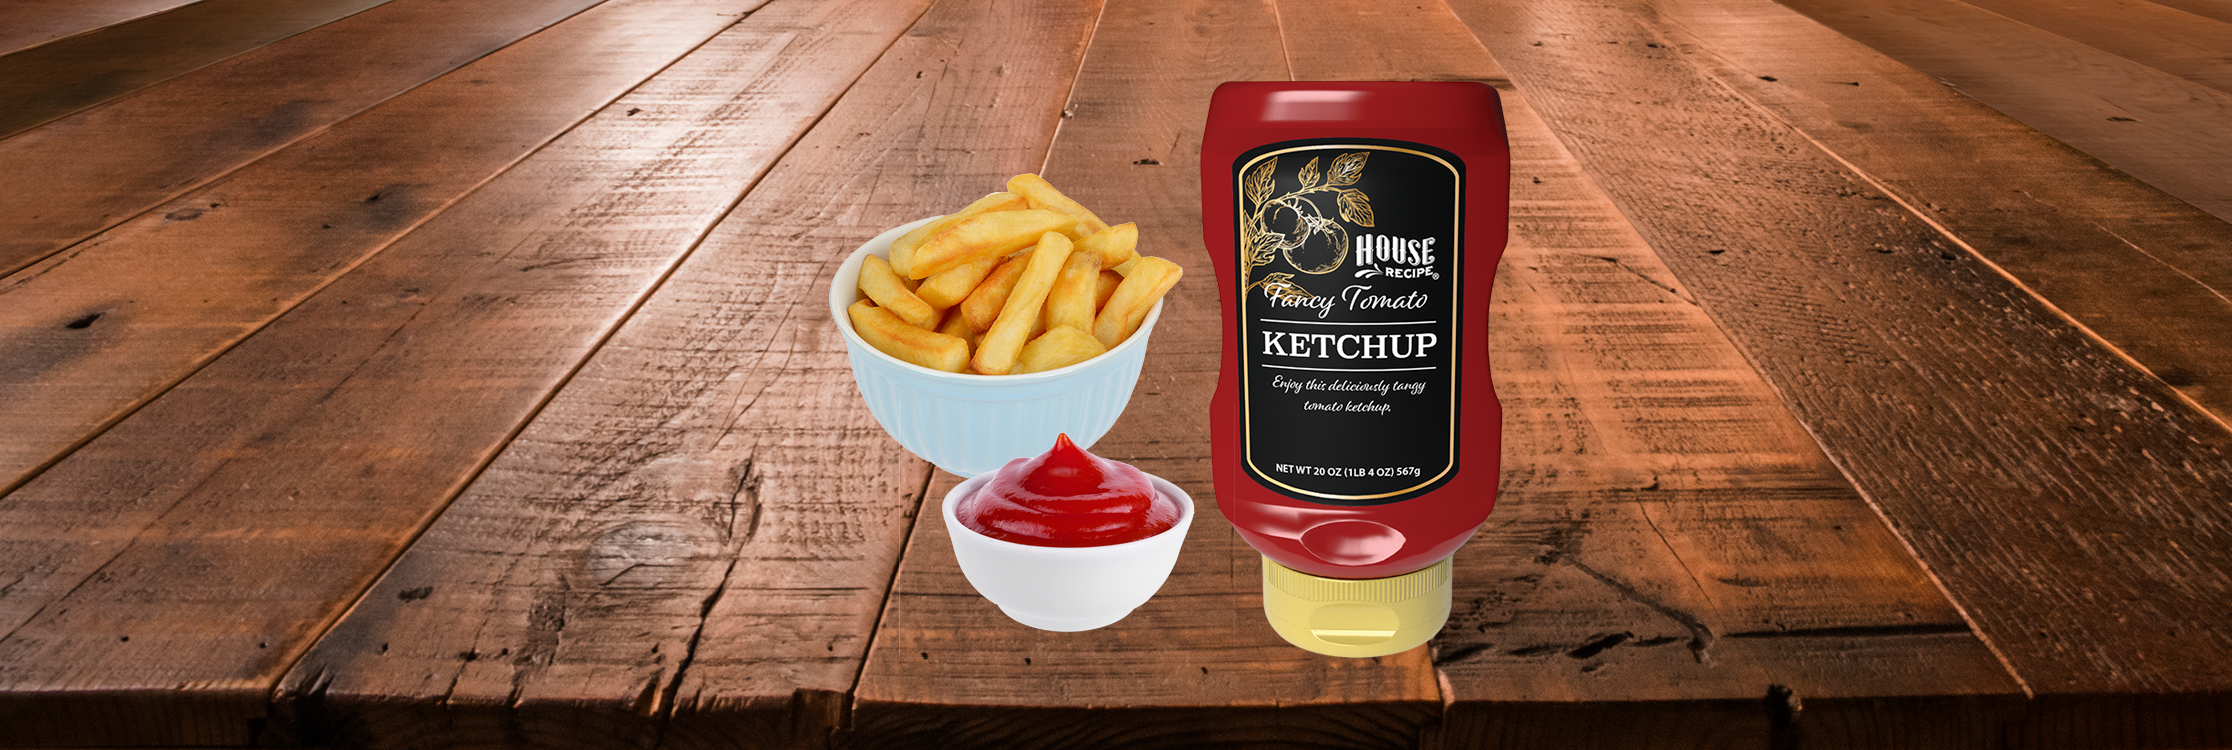 https://foodie.sysco.com/wp-content/uploads/2020/01/Notextketchup-1.png